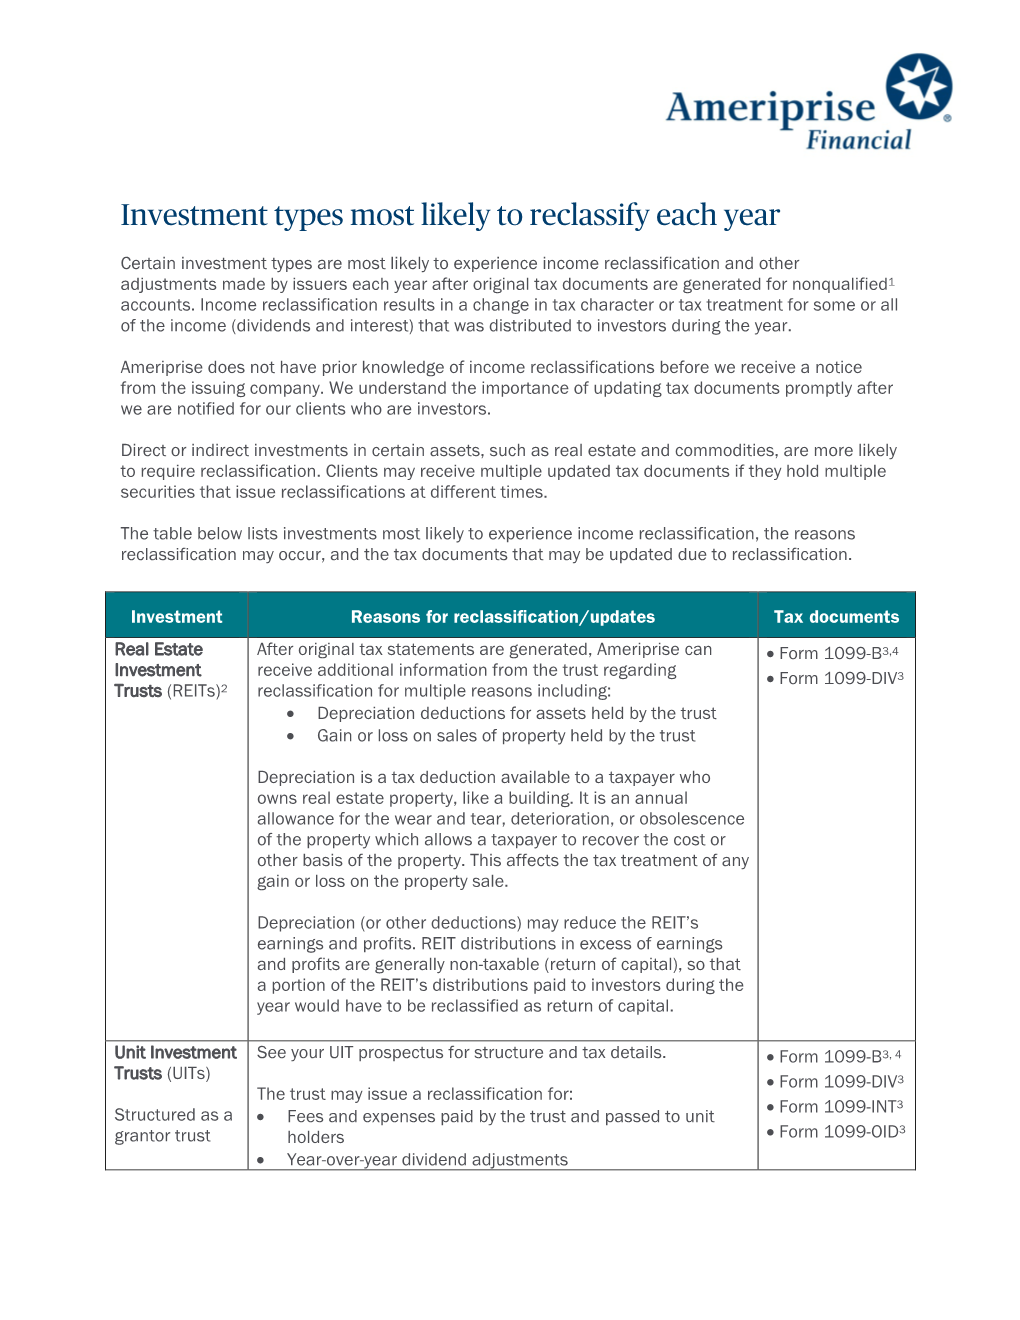 Investment Types Most Likely to Reclassify Each Year